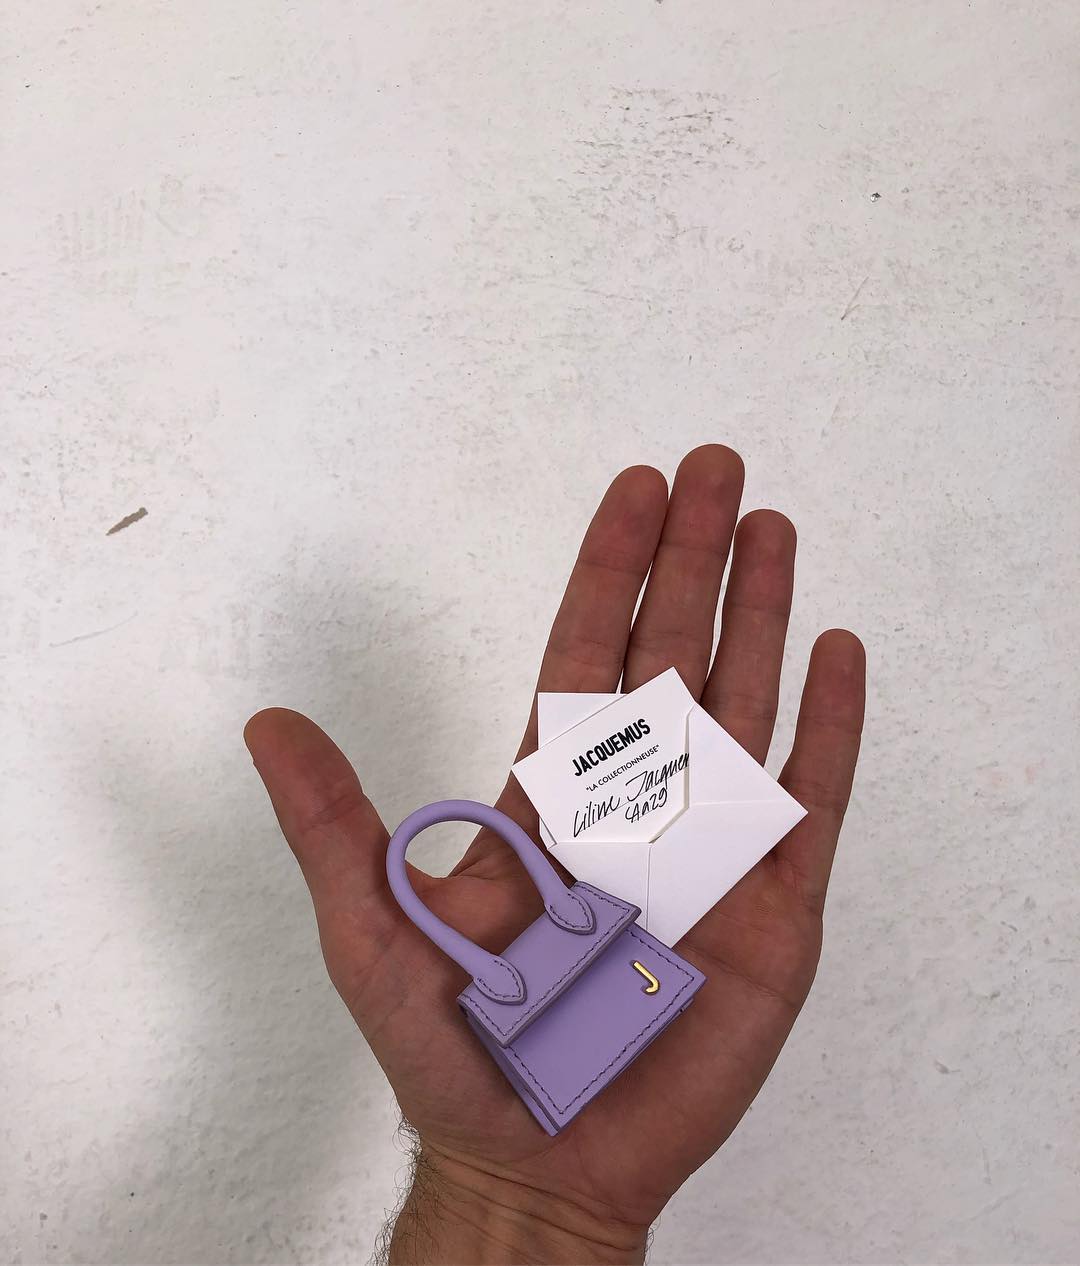 Jacquemus just introduced the tiniest handbags and the fashion